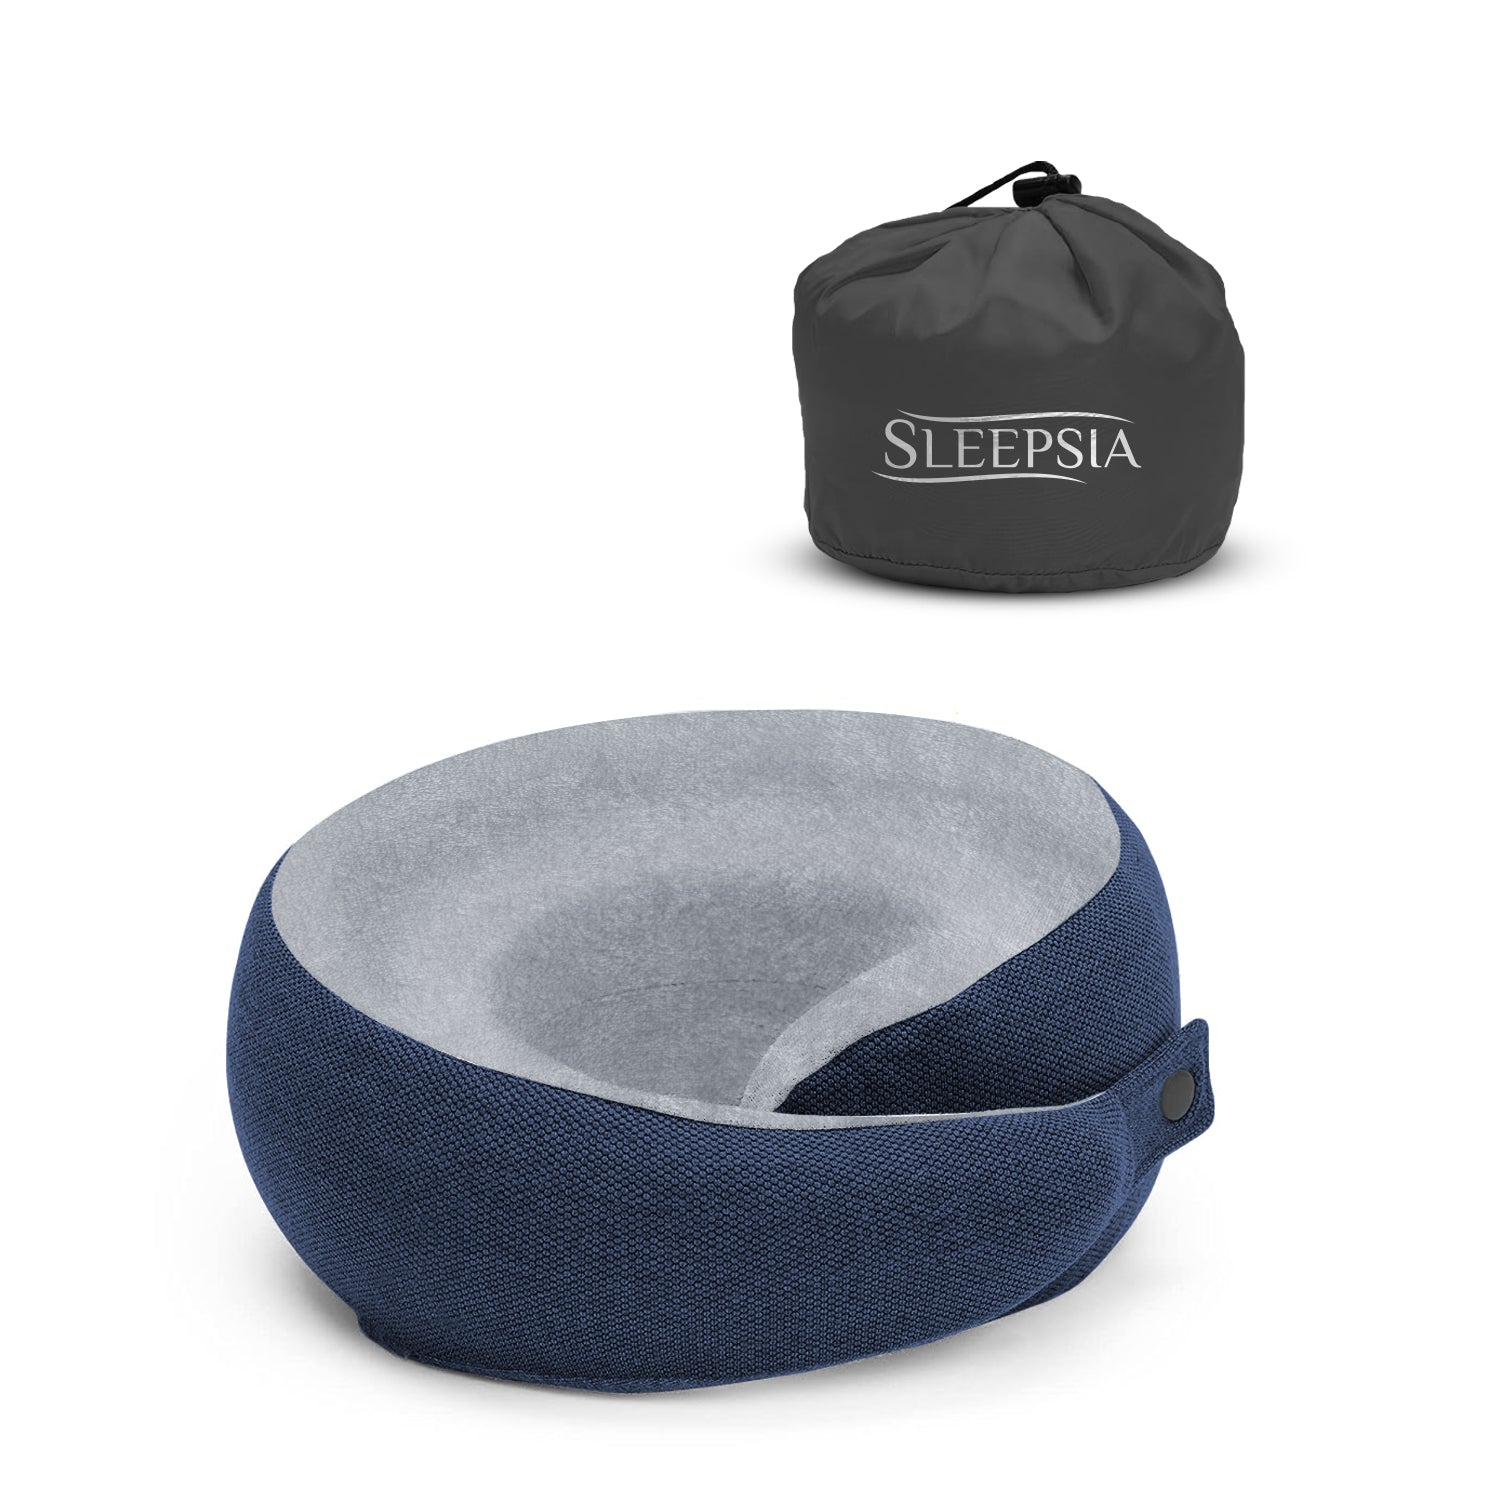 Snoozed Travel Pillow